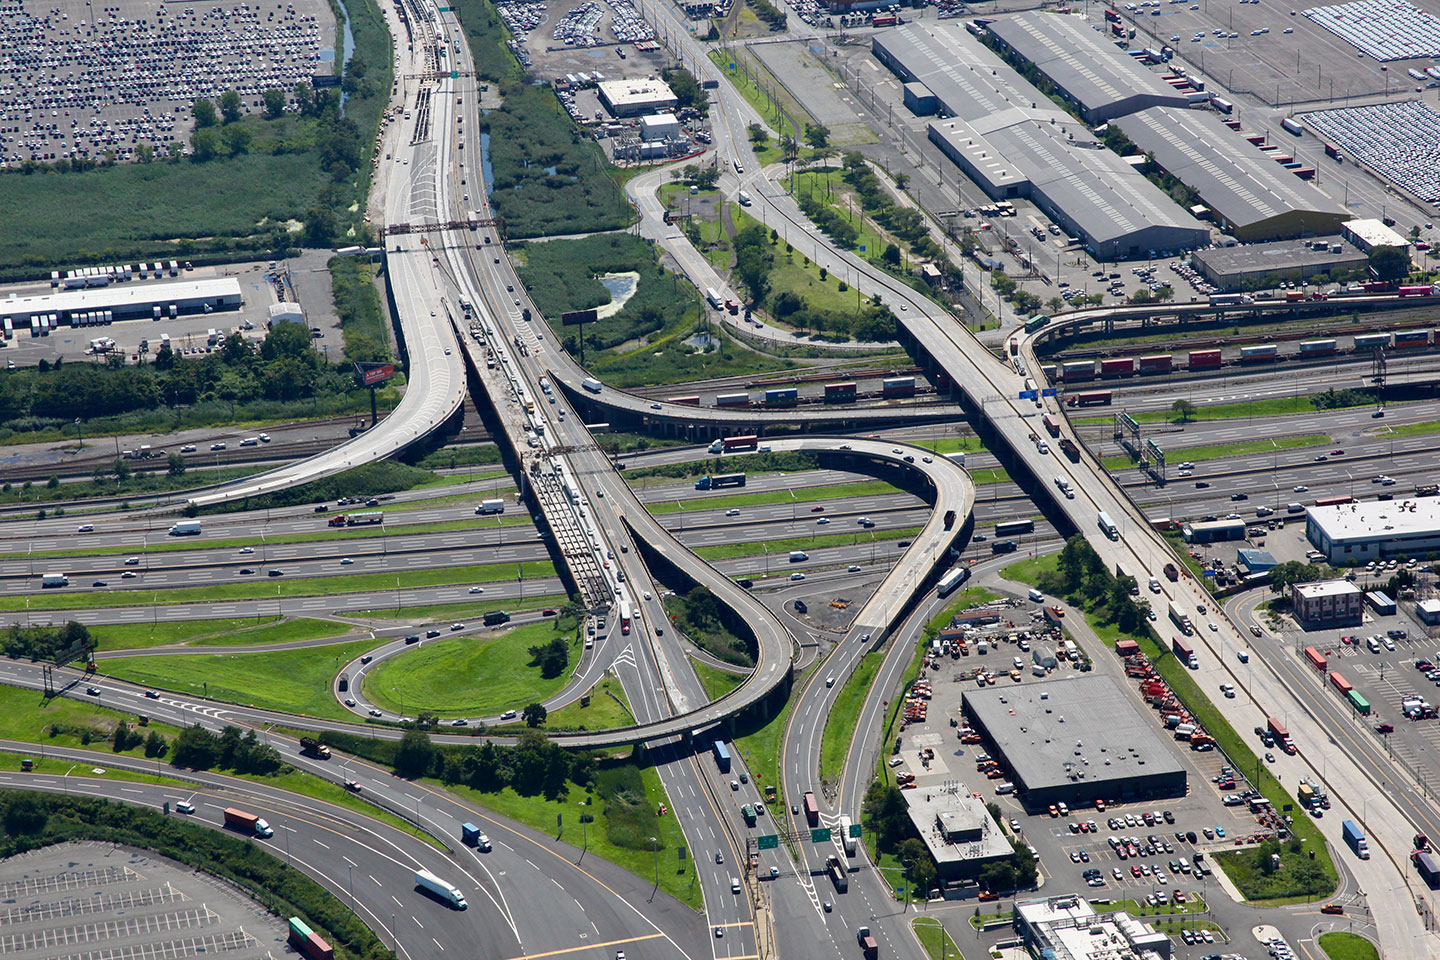 The New Jersey Turnpike Authority Newark Bay-Hudson County Extension Roadway begins at Interchange 14 and serves as a critical access route. Photo courtesy of Intervision New Media.